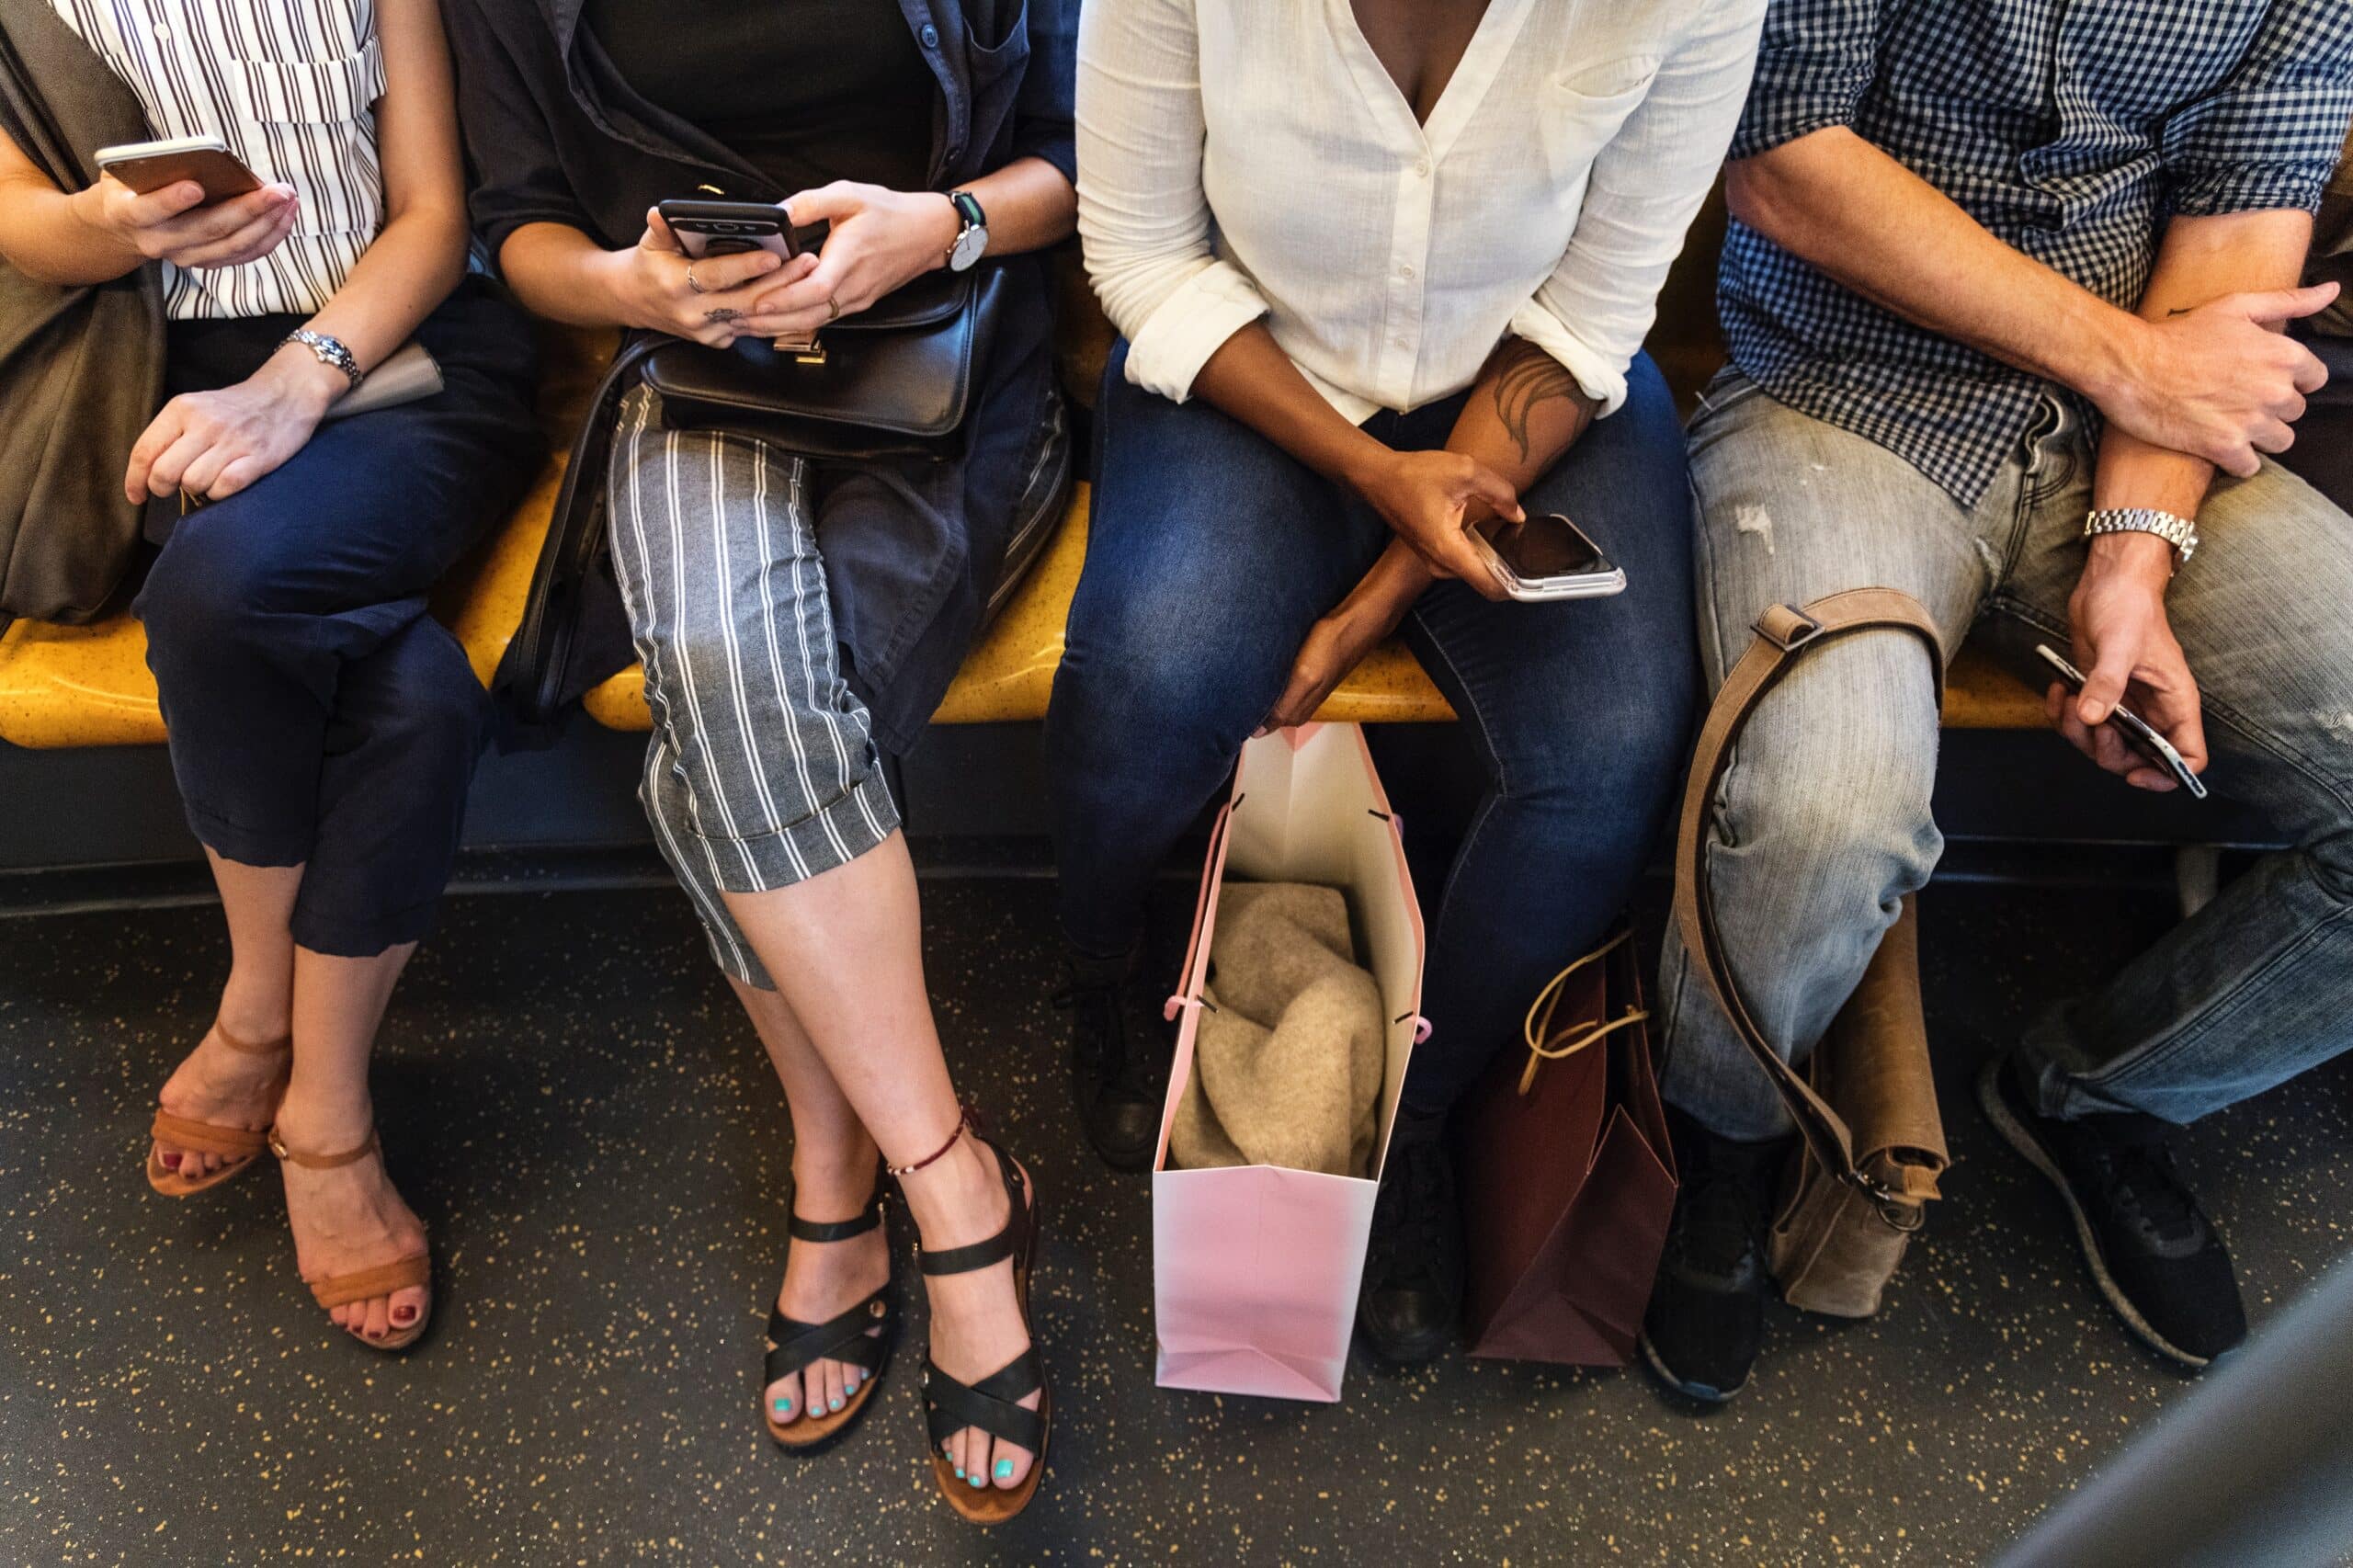 Photo of people sitting on a subway